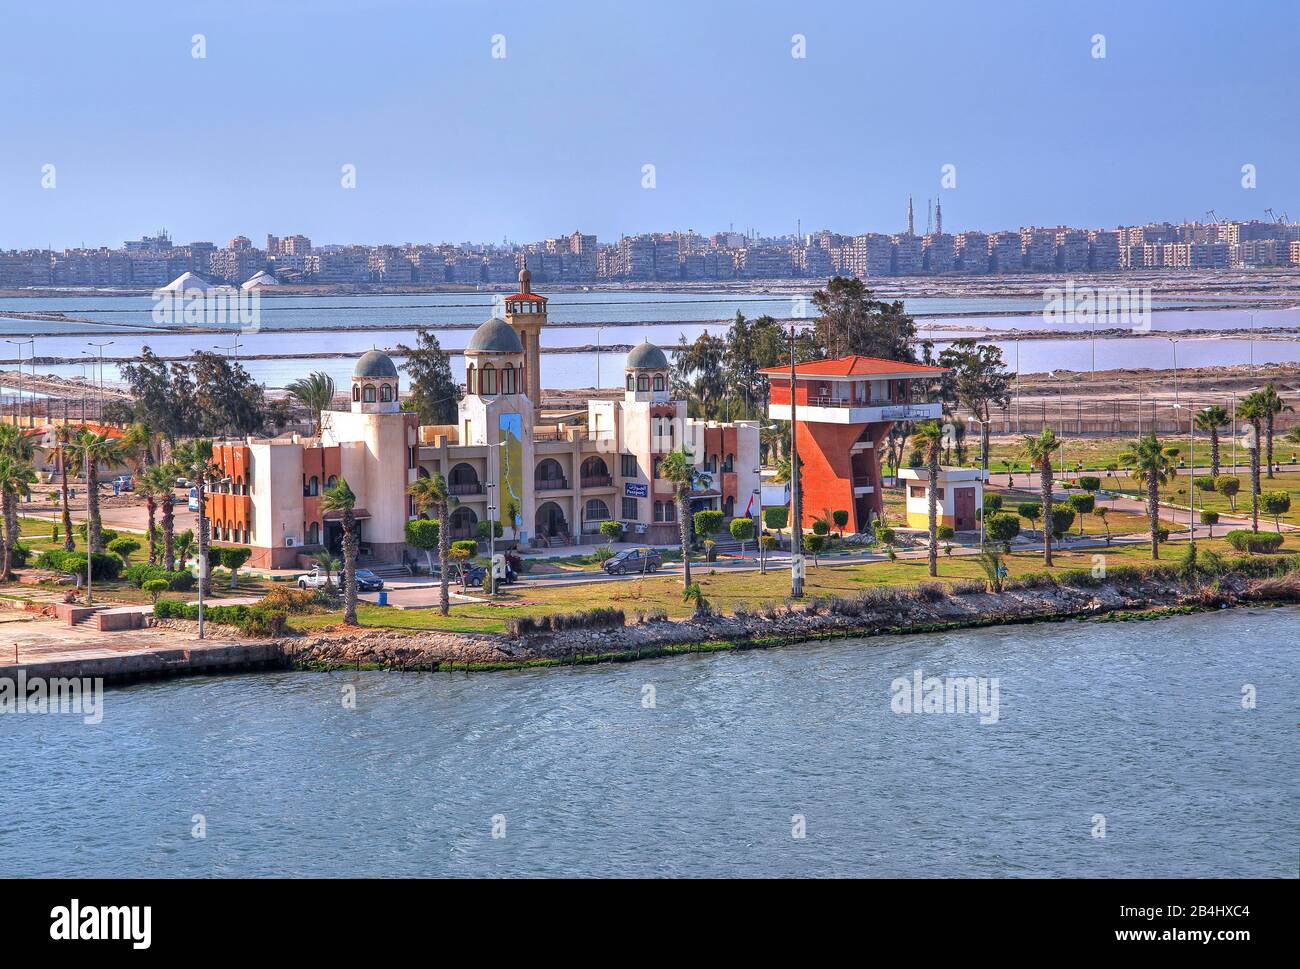 Pilot station of the channel pilots at the Suez Canal (Suez Canal) at Port Said Mediterranean Sea, Egypt Stock Photo